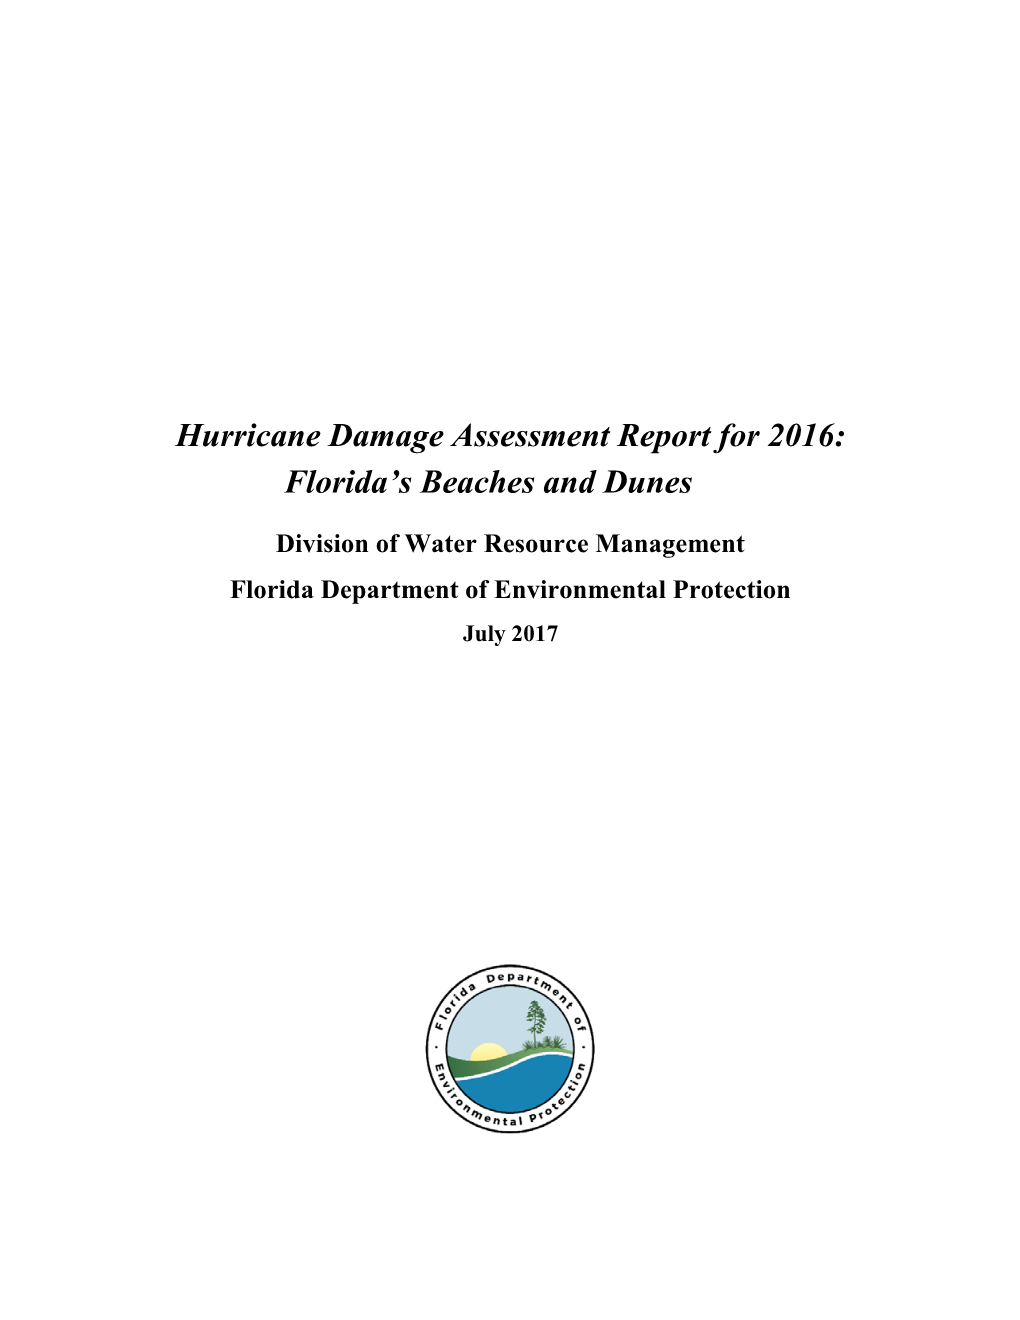 Hurricane Damage Assessment Report for 2016: Florida's Beaches